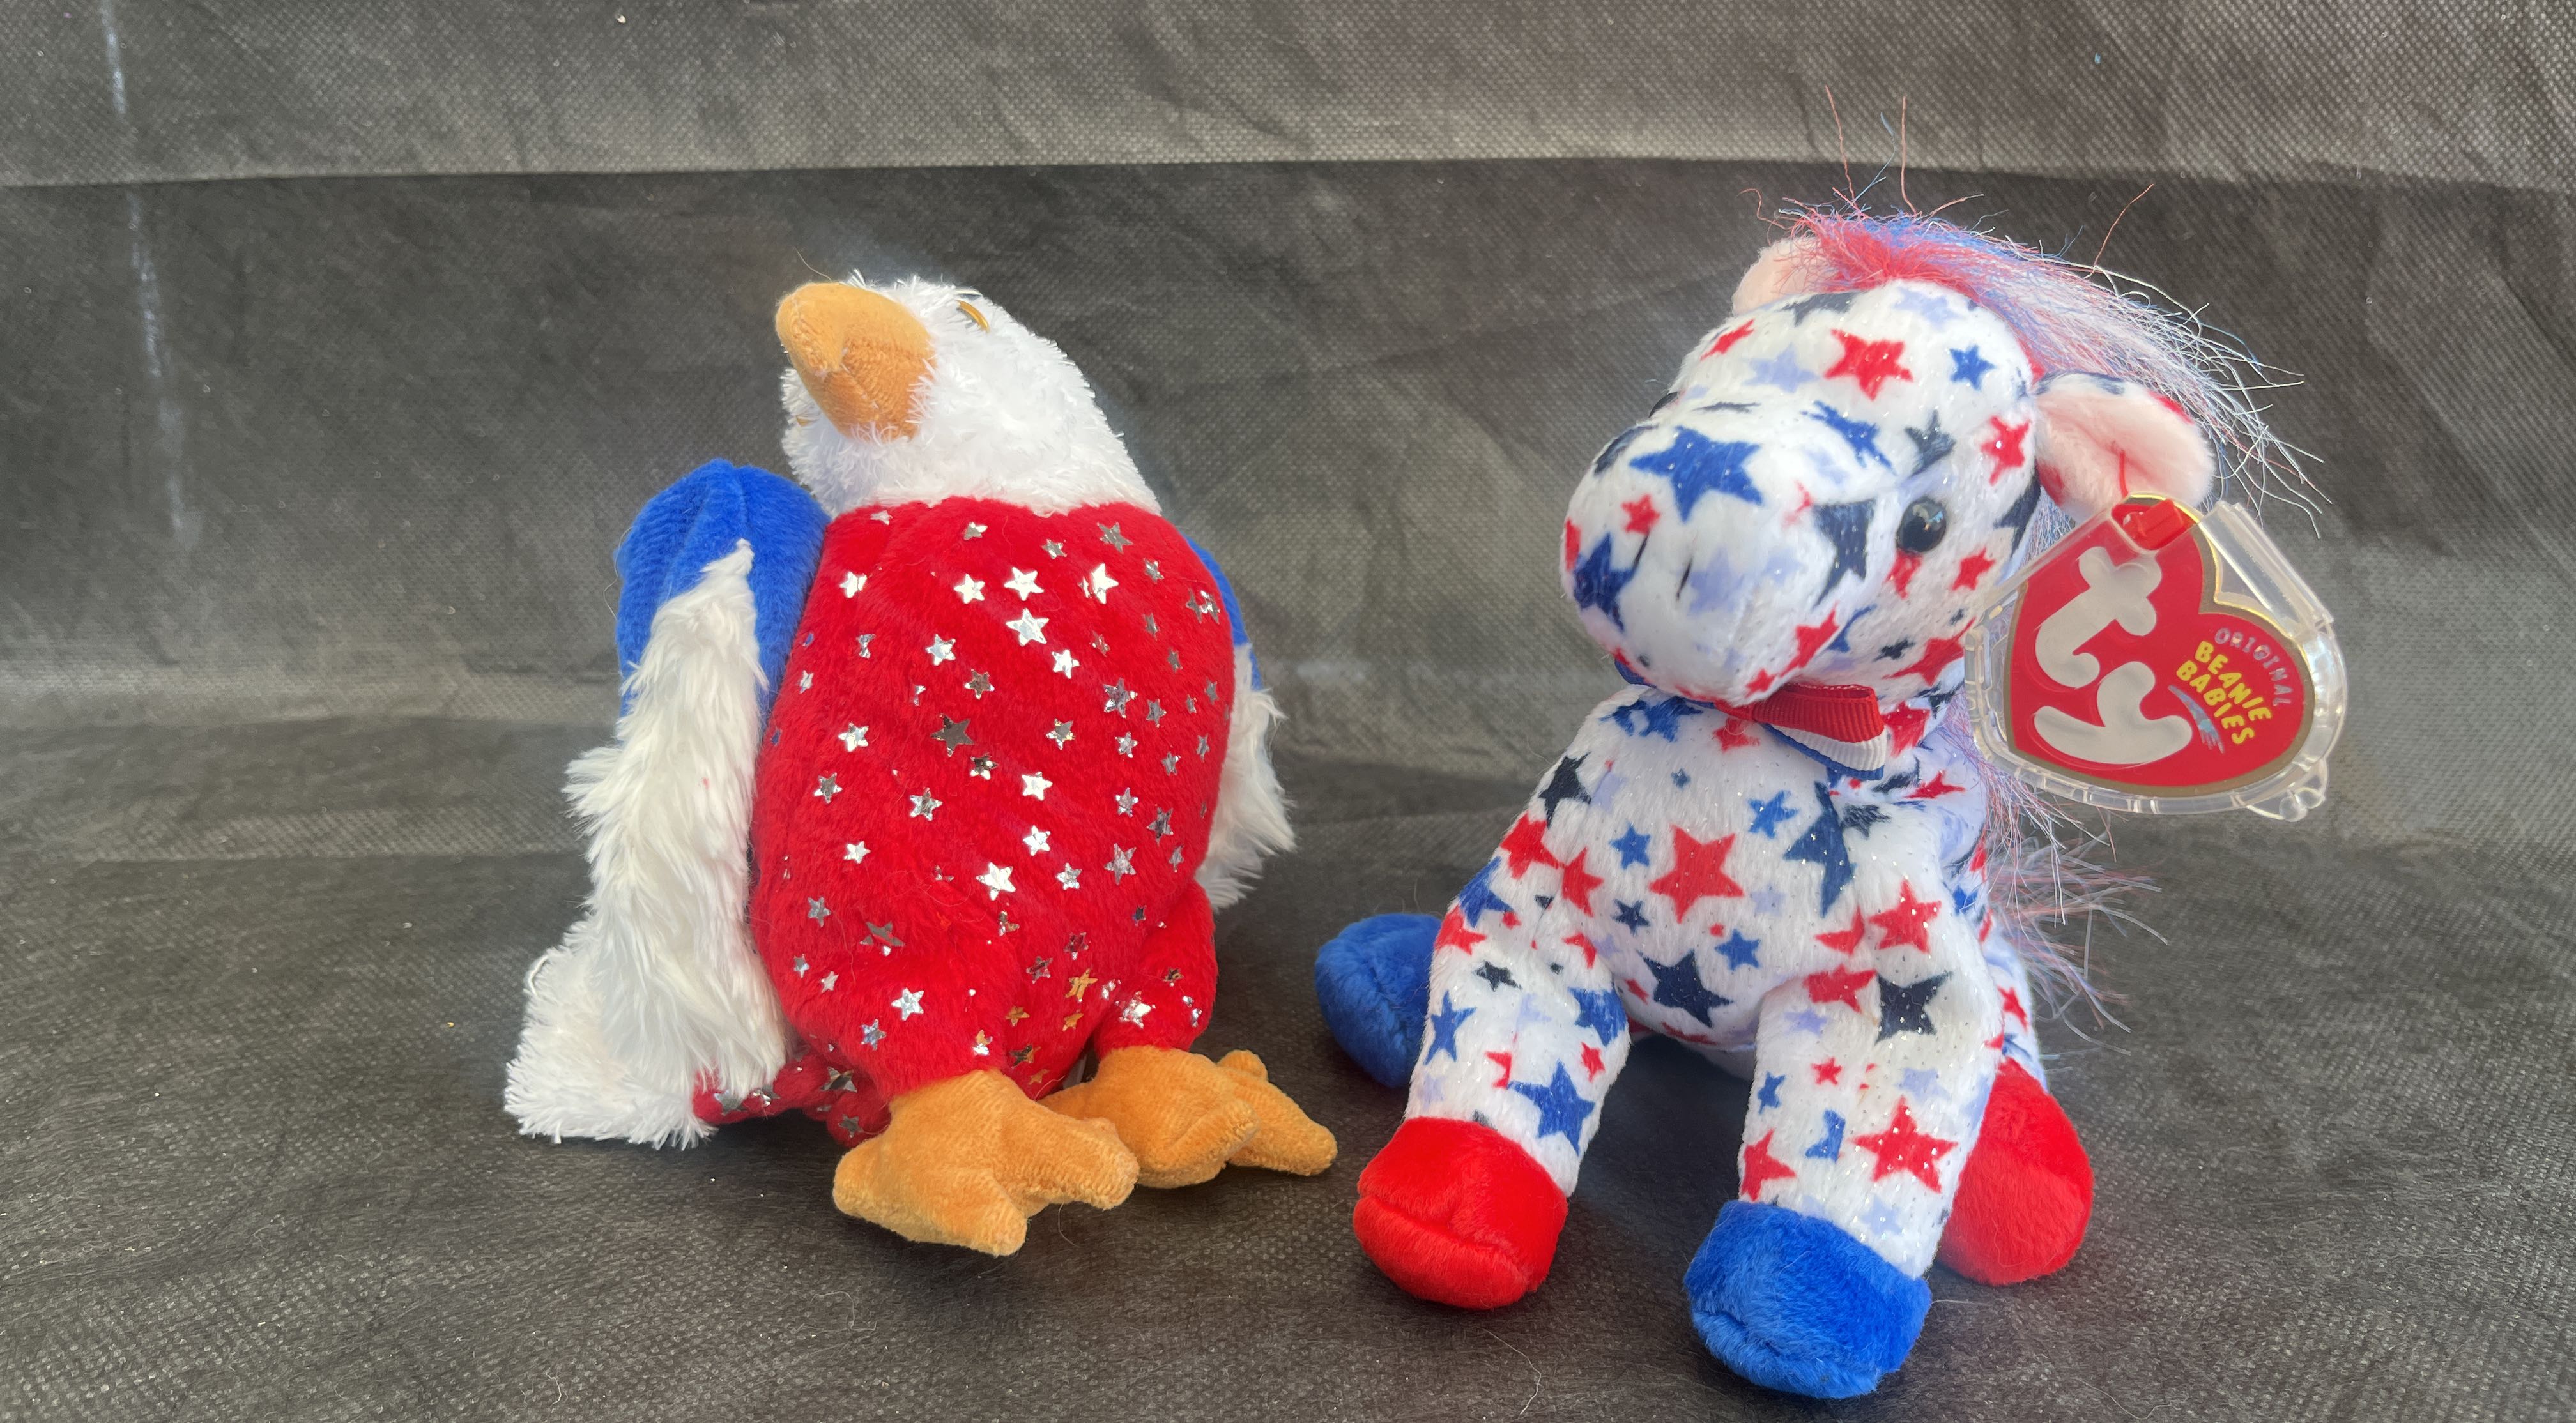 Retired TY Beanie Babies See Description and Pick Your Beanie F 